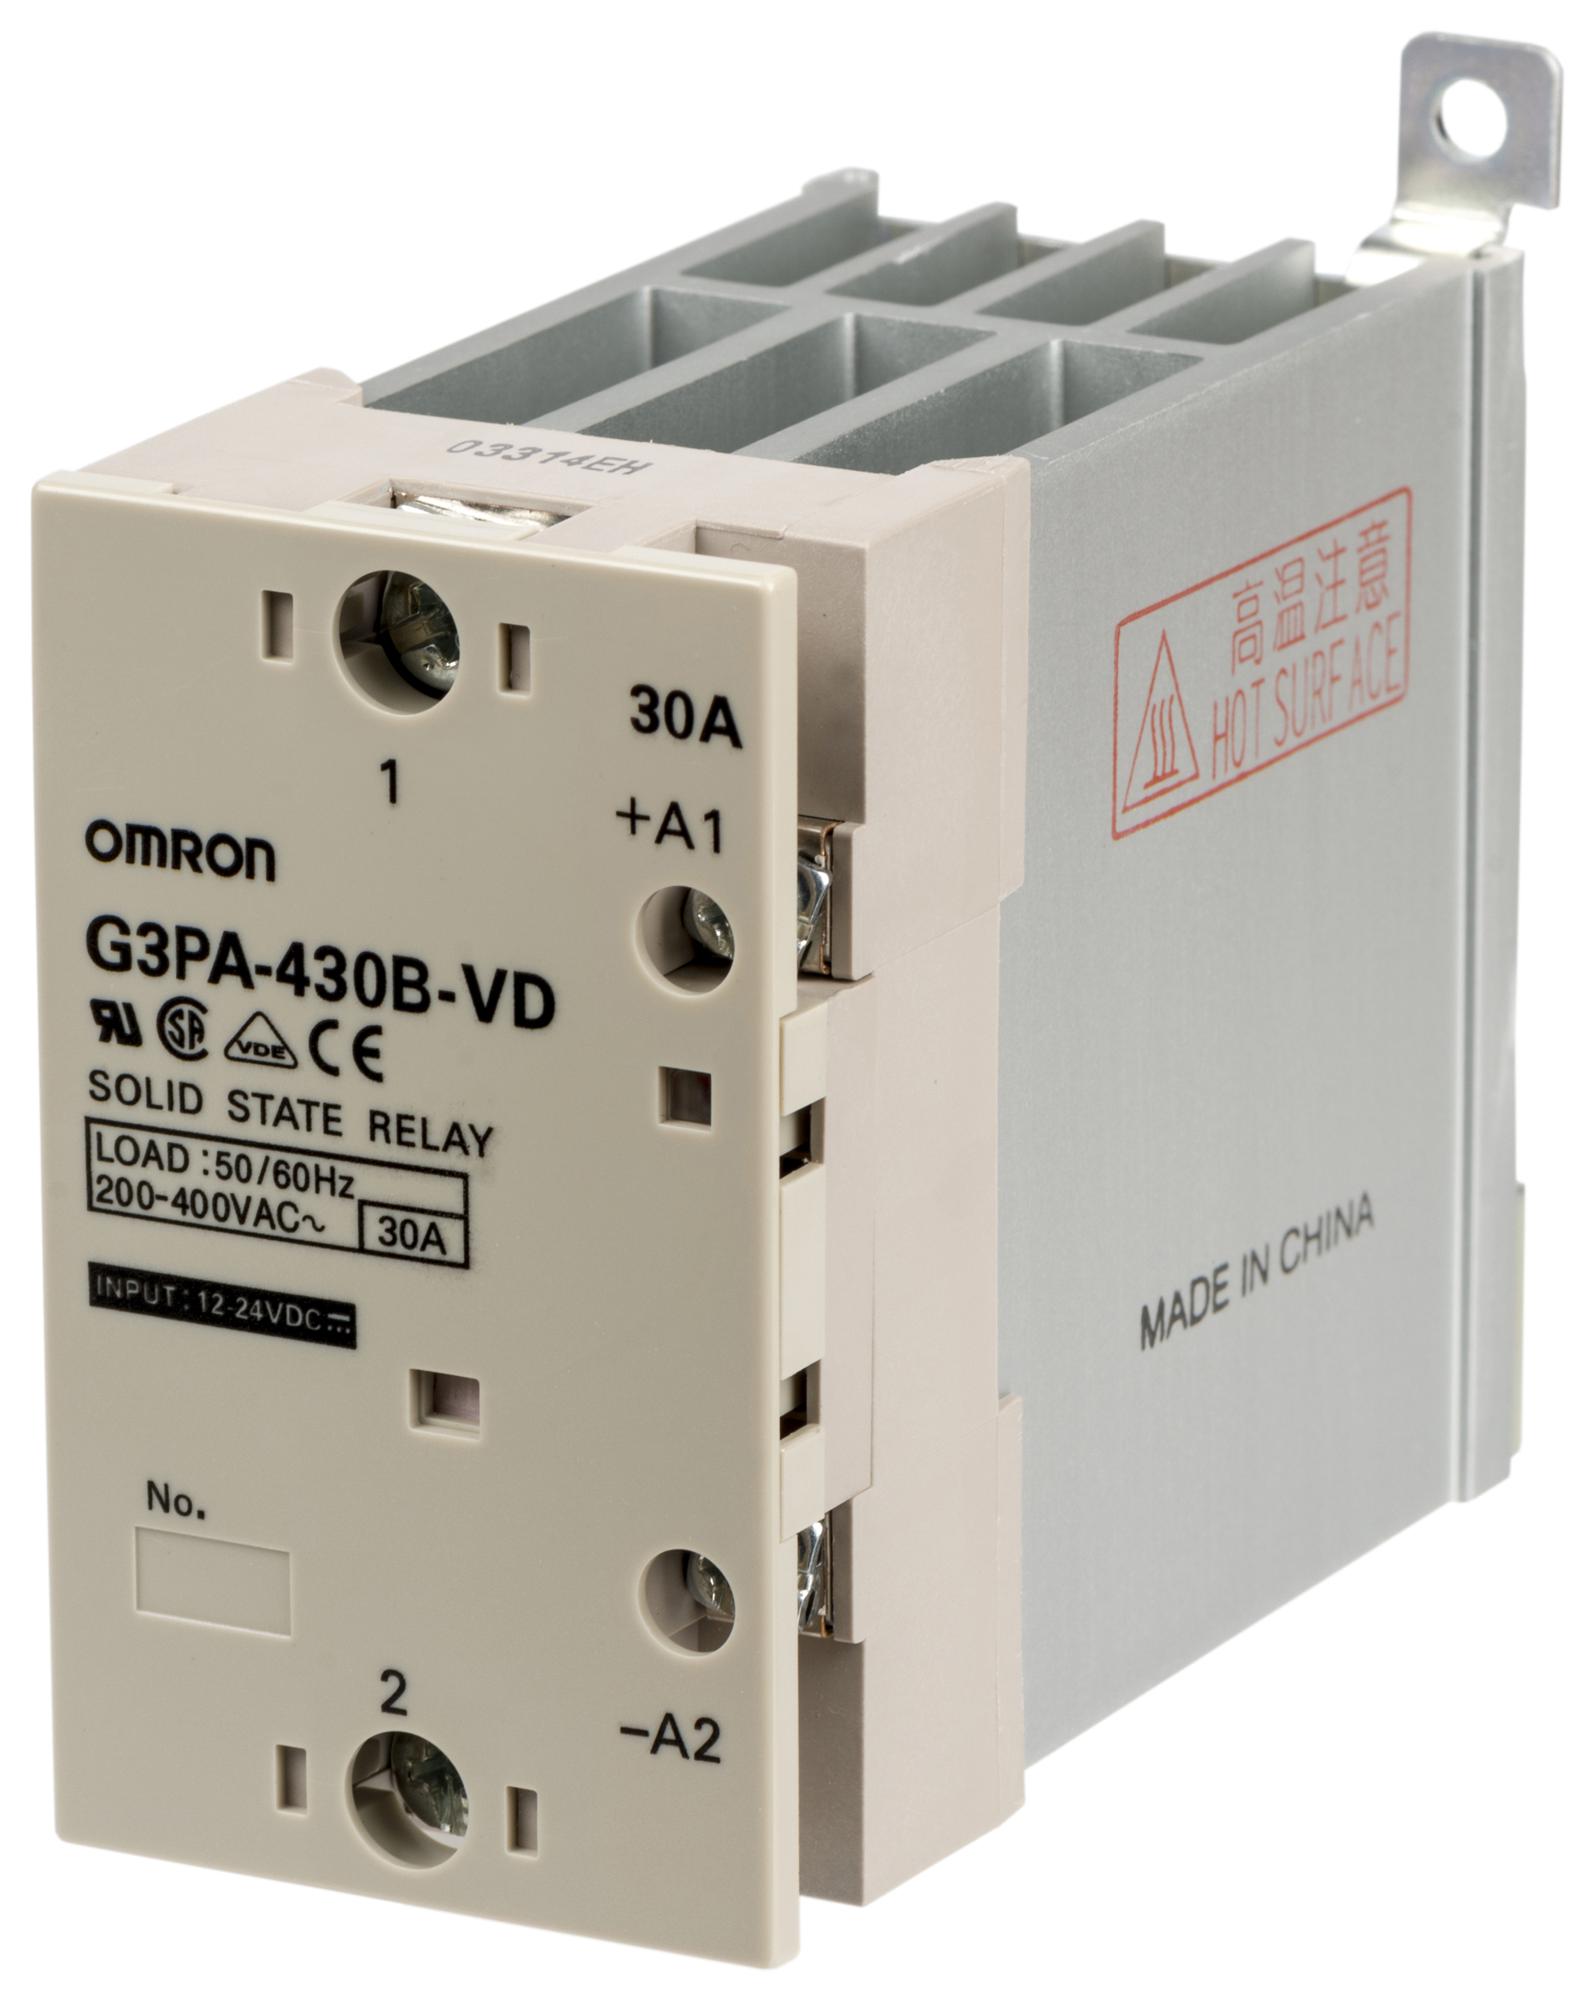 G3PA-430B-VD-2 12-24VDC SOLID STATE RELAYS OMRON